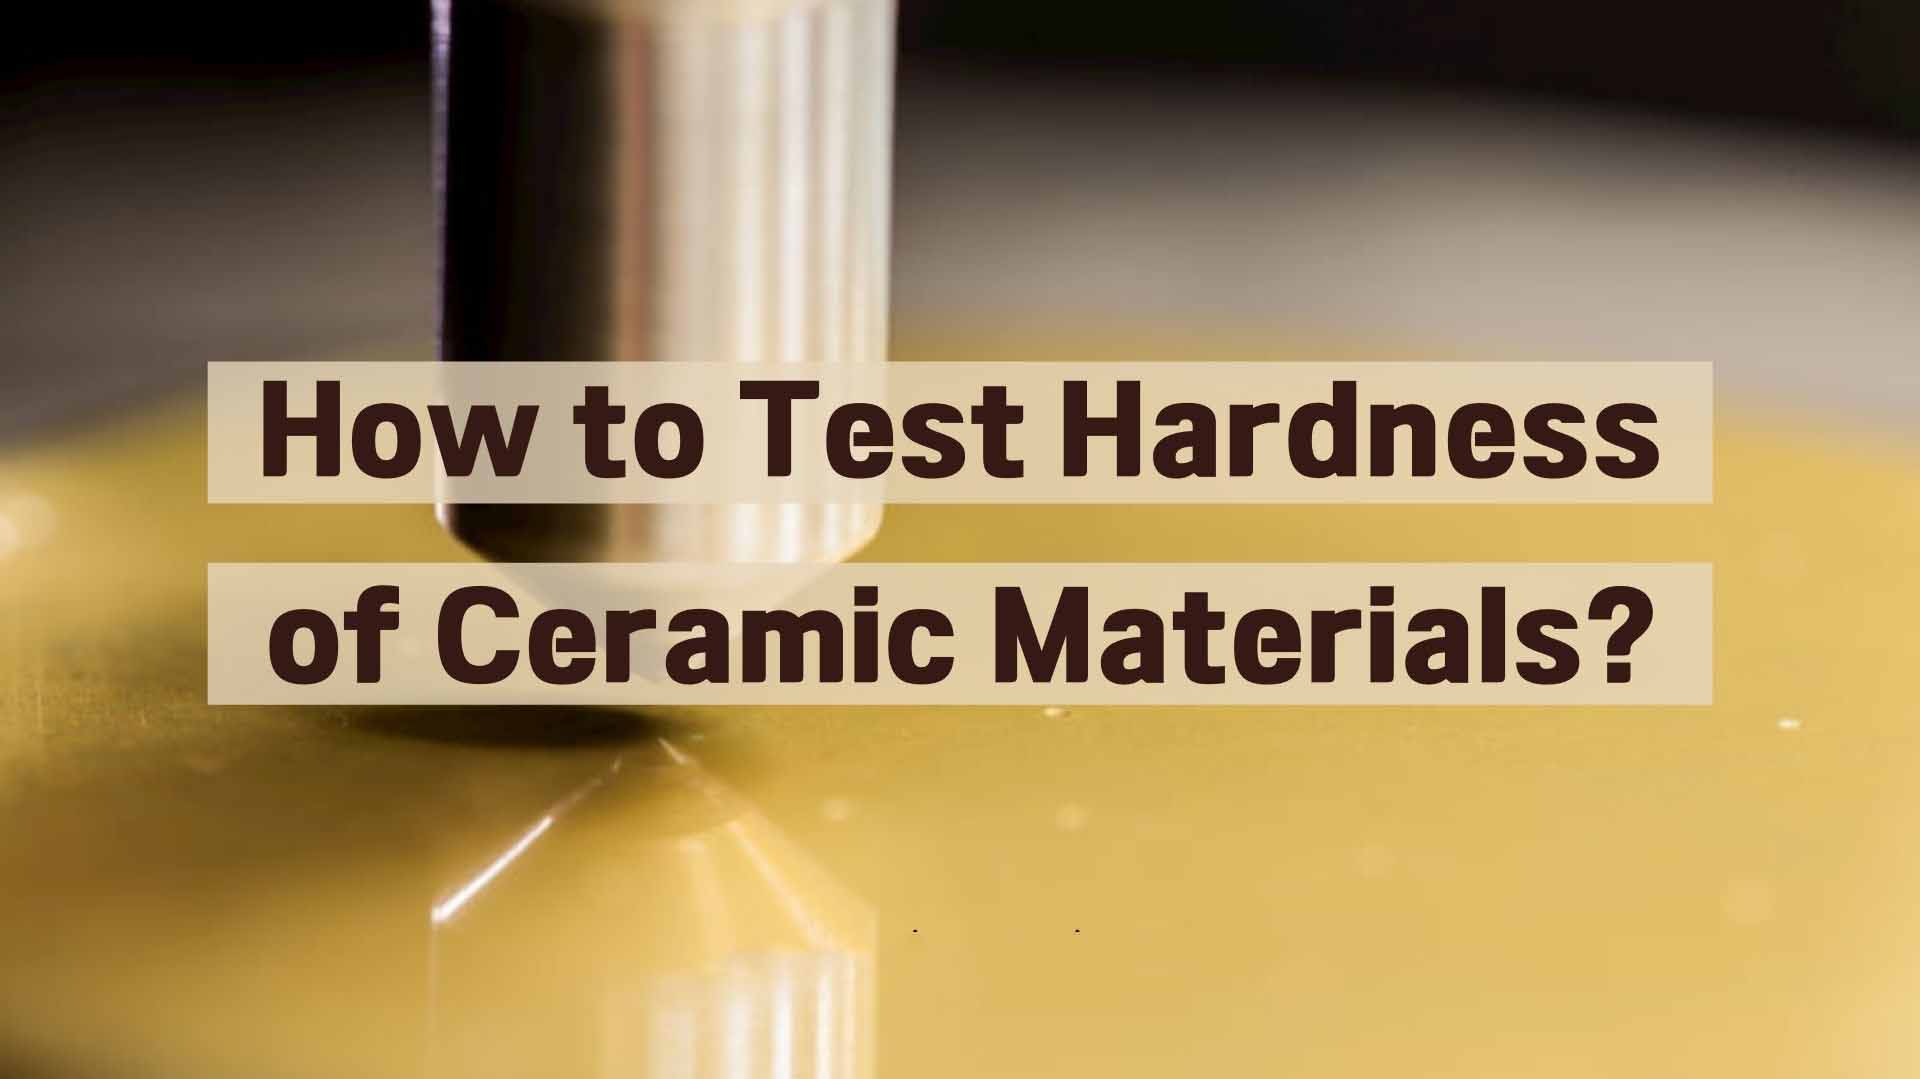 How to Test Hardness of Ceramic Materials